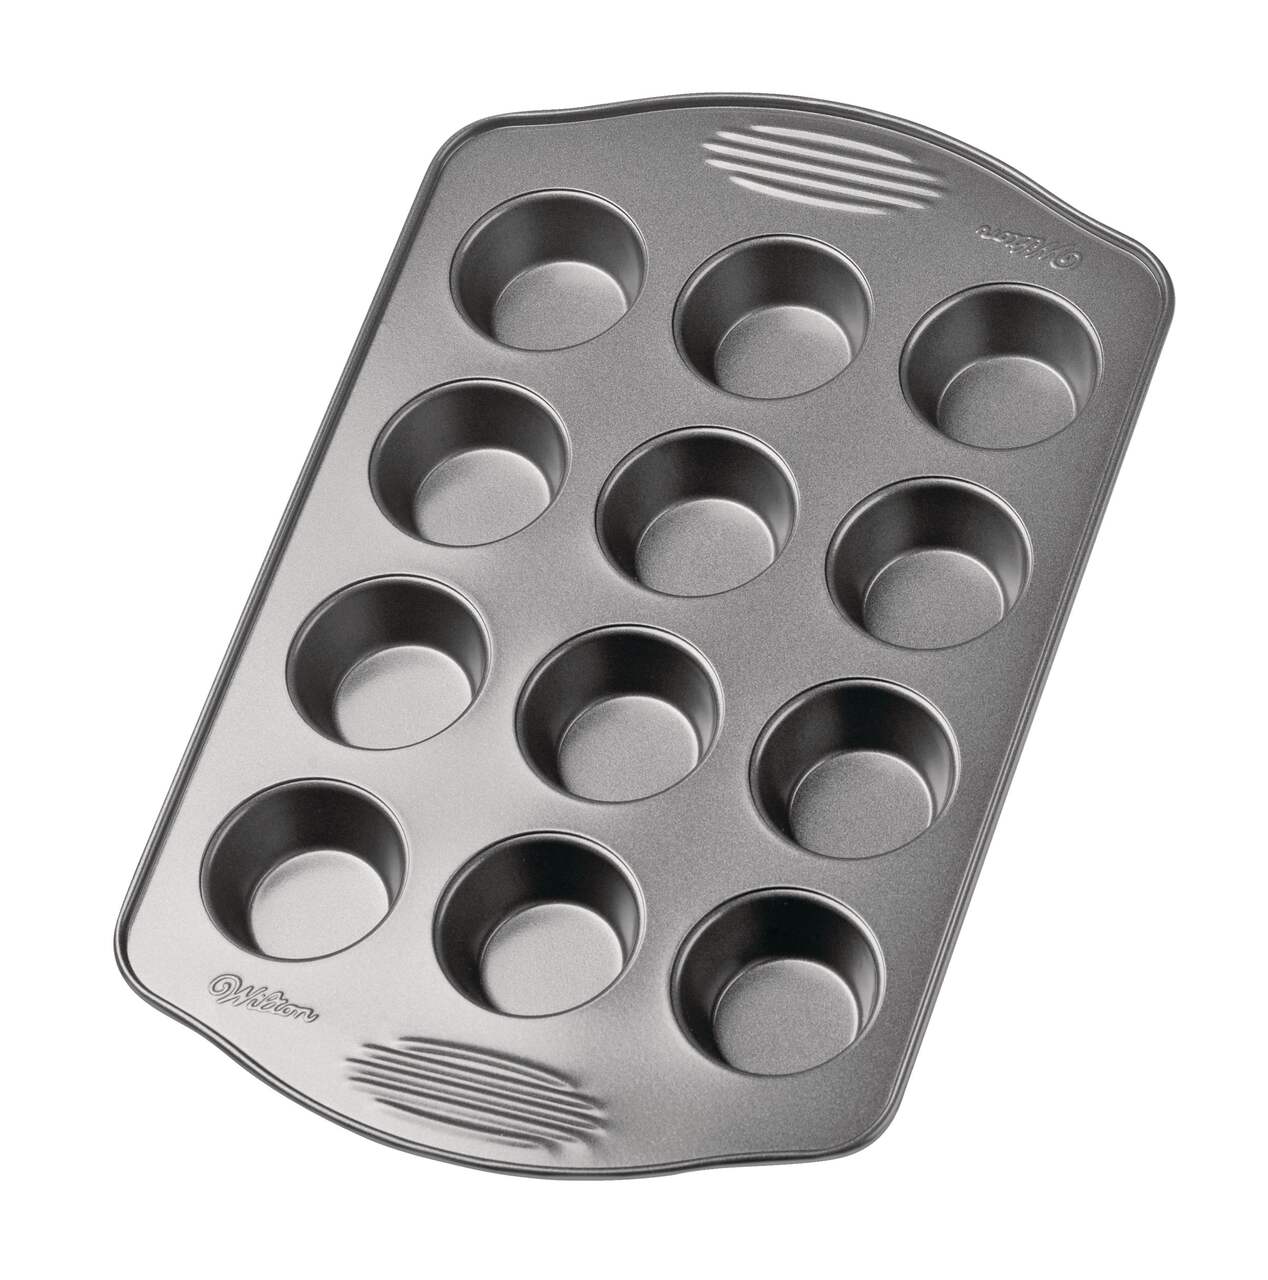 https://media-www.canadiantire.ca/product/living/kitchen/bakeware-baking-prep/0420517/wilton-gourmet-choice-muffin-12-cup-01f970c7-d53d-4bf8-a61b-3006c0152e82-jpgrendition.jpg?imdensity=1&imwidth=640&impolicy=mZoom